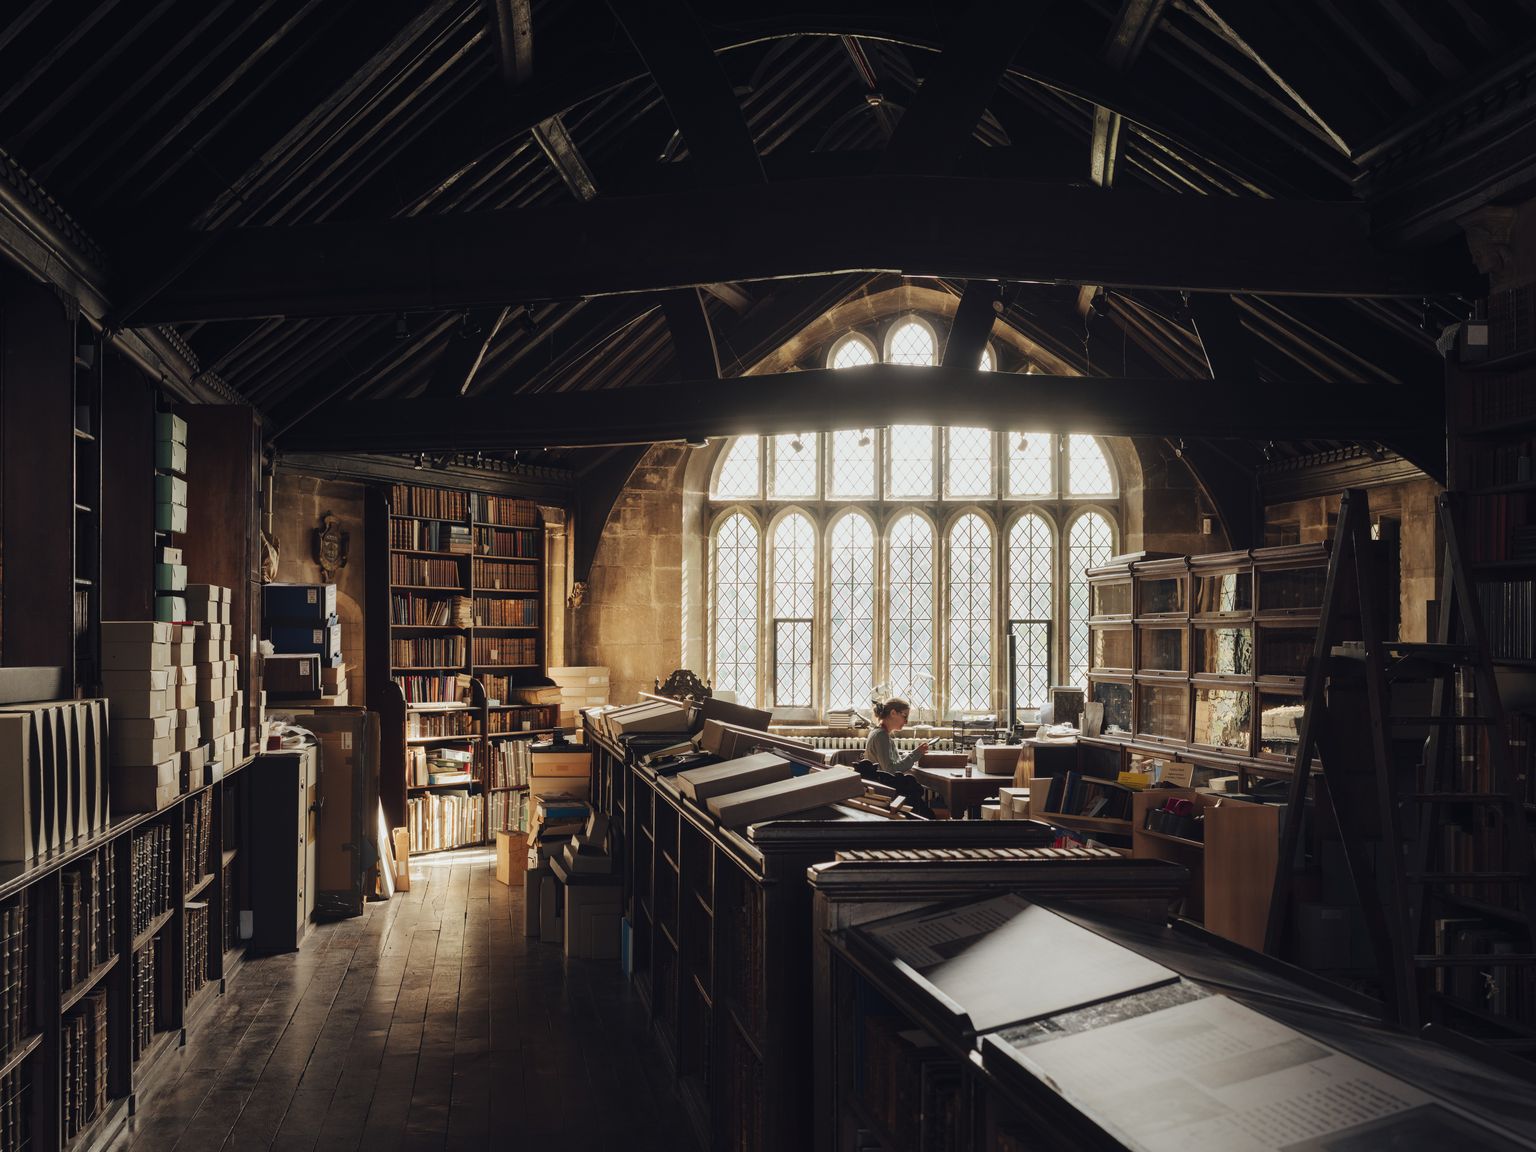 Gloucester Cathedral's Monastic Library